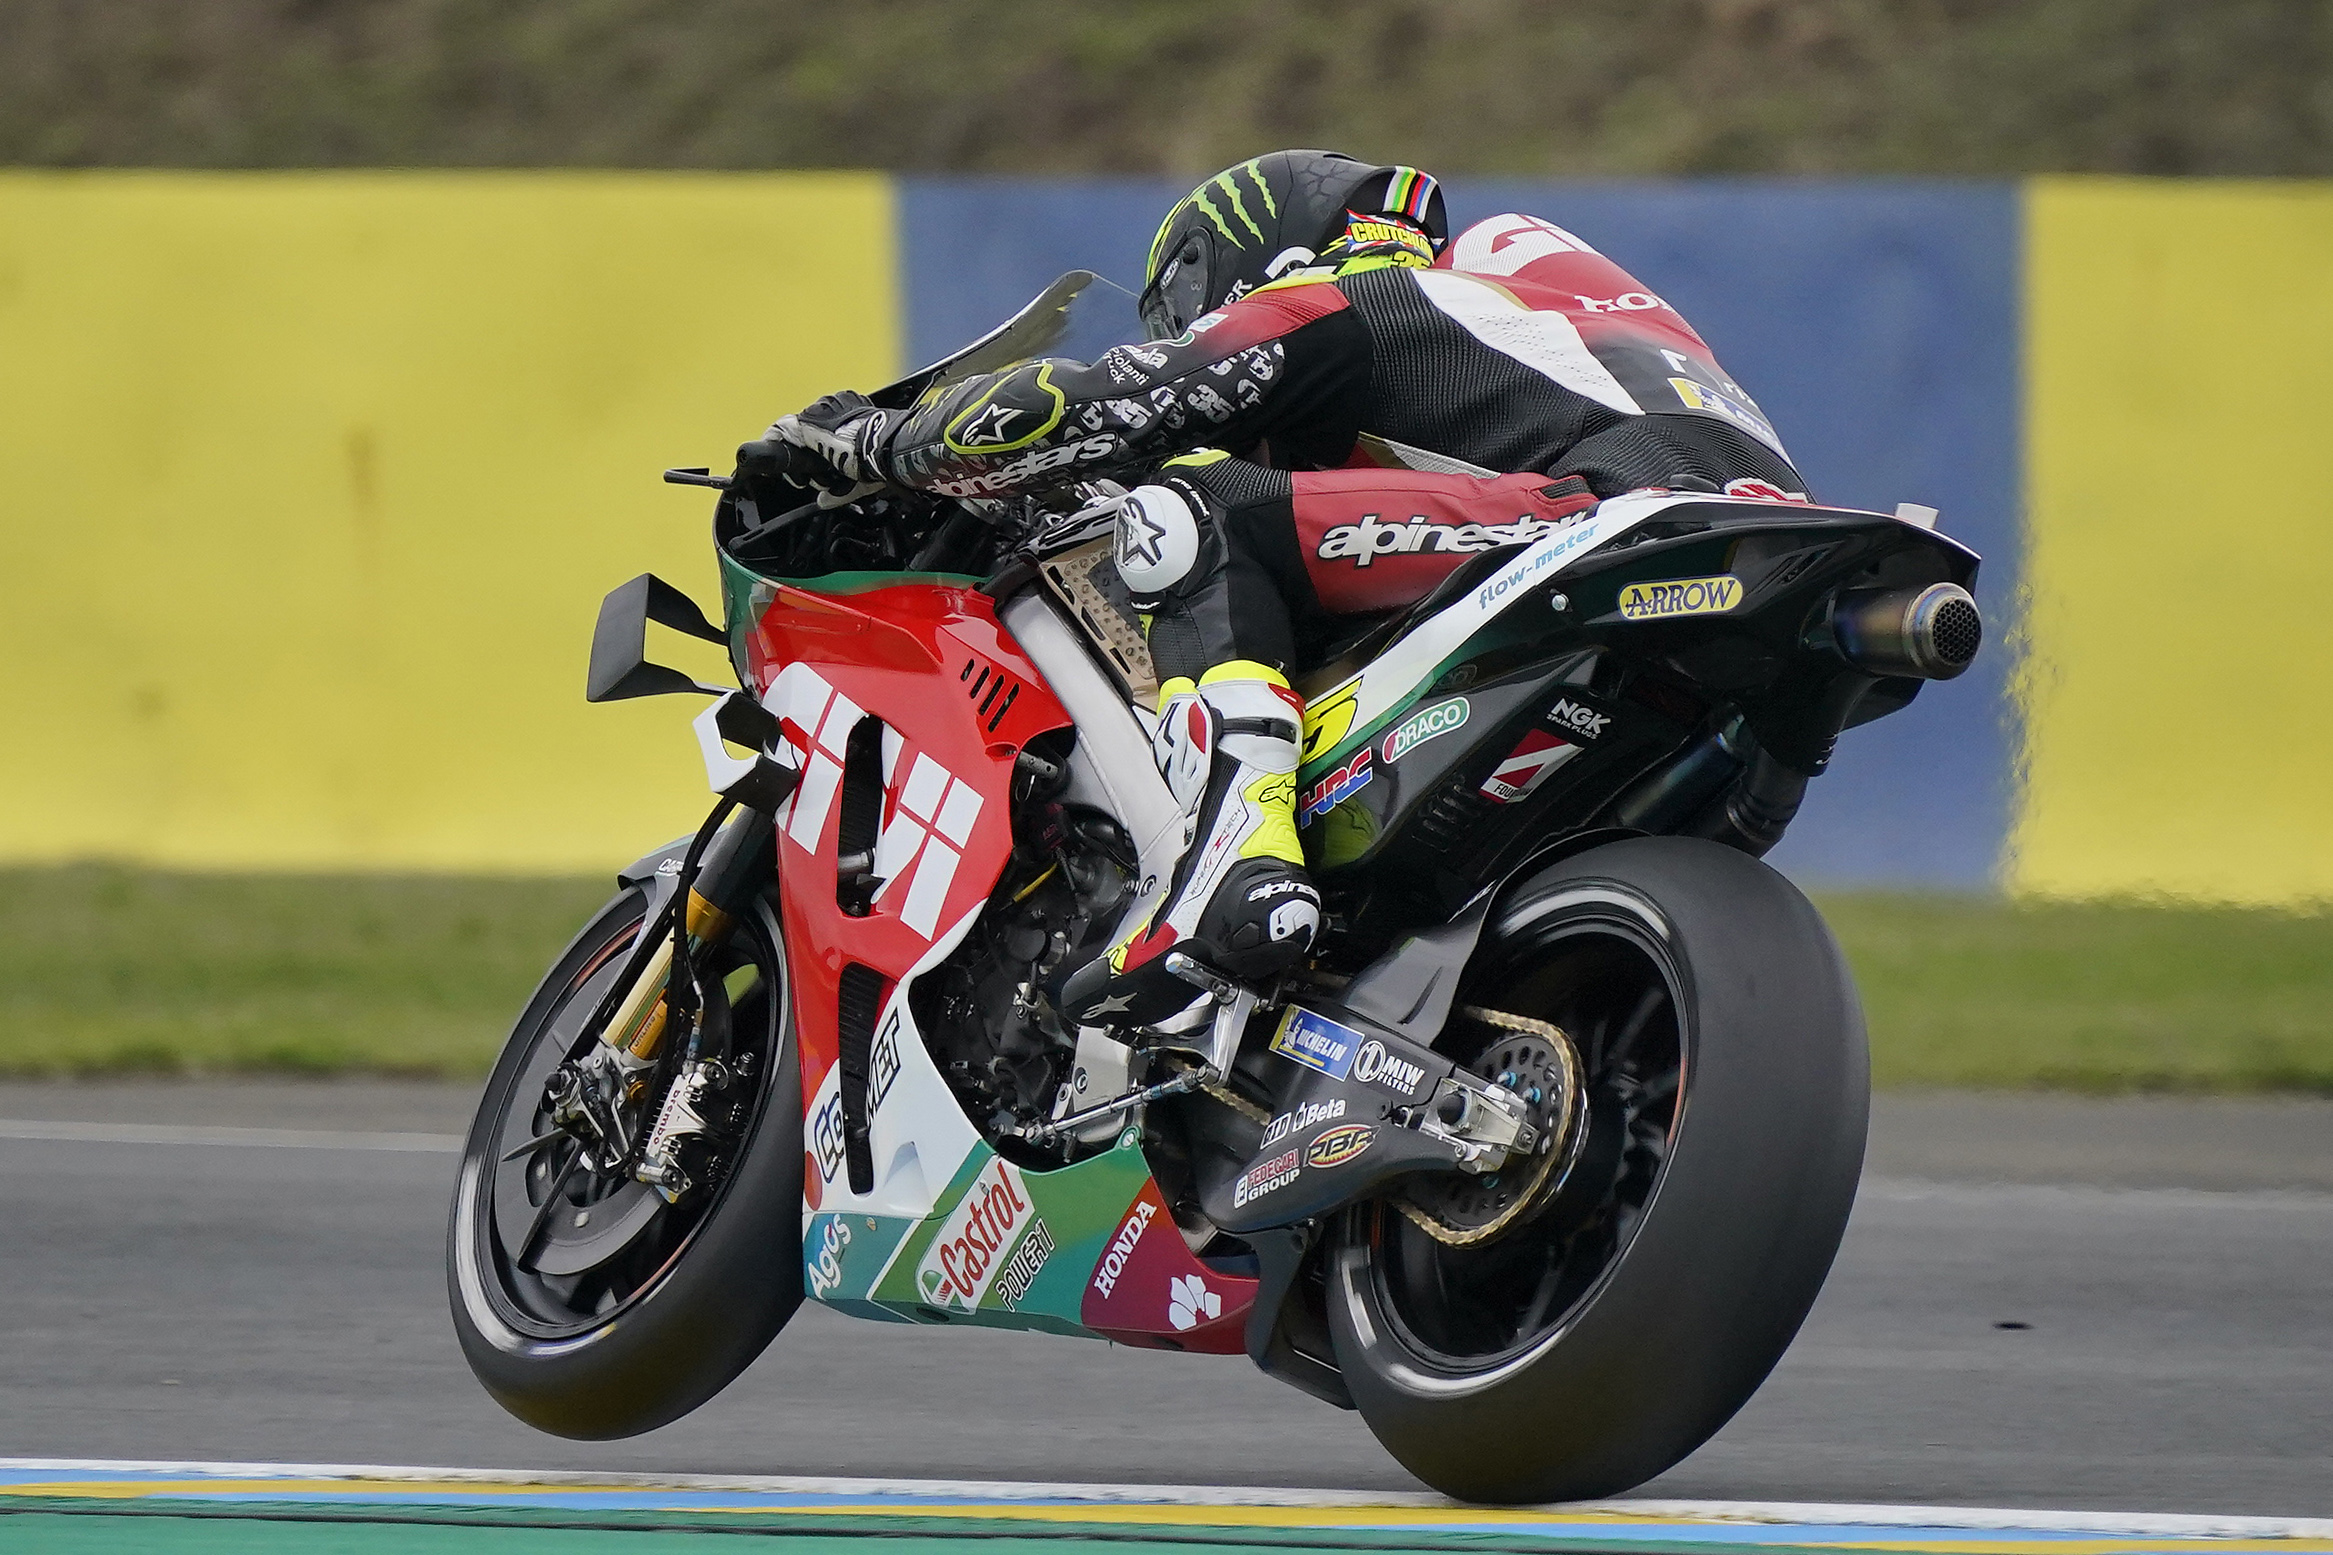 Positive first day for Crutchlow in rainy France